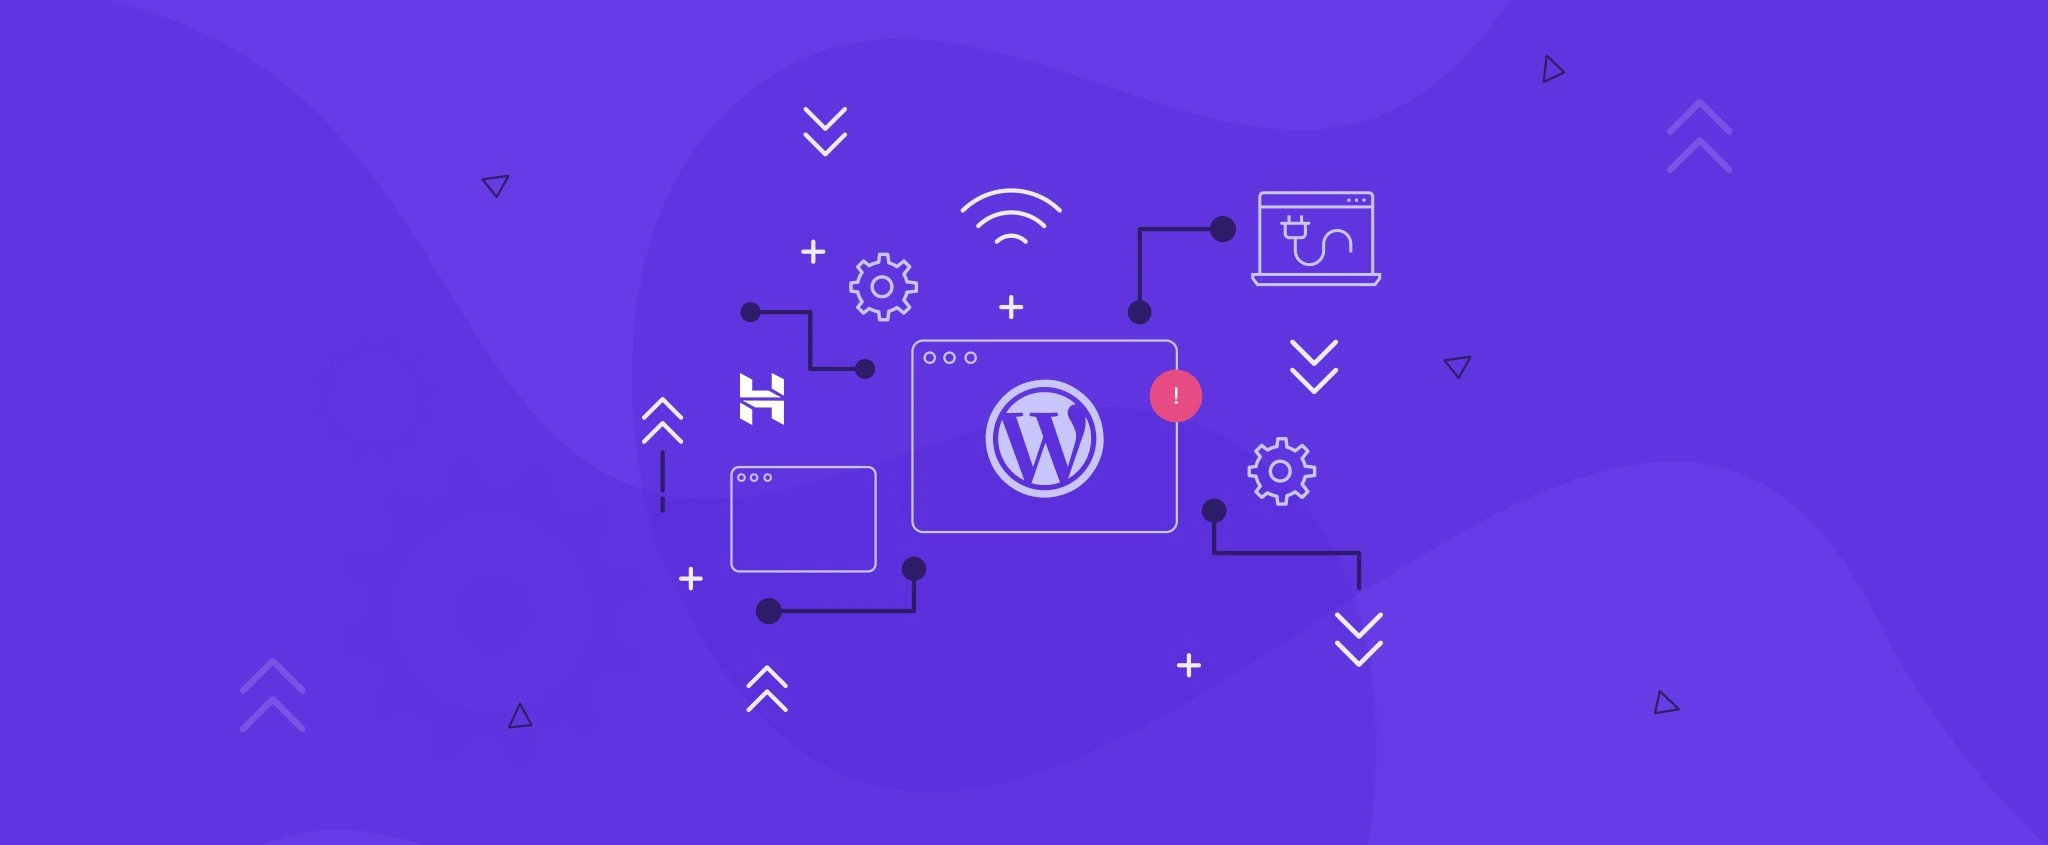 WordPress Pattern Creator Is Now Available